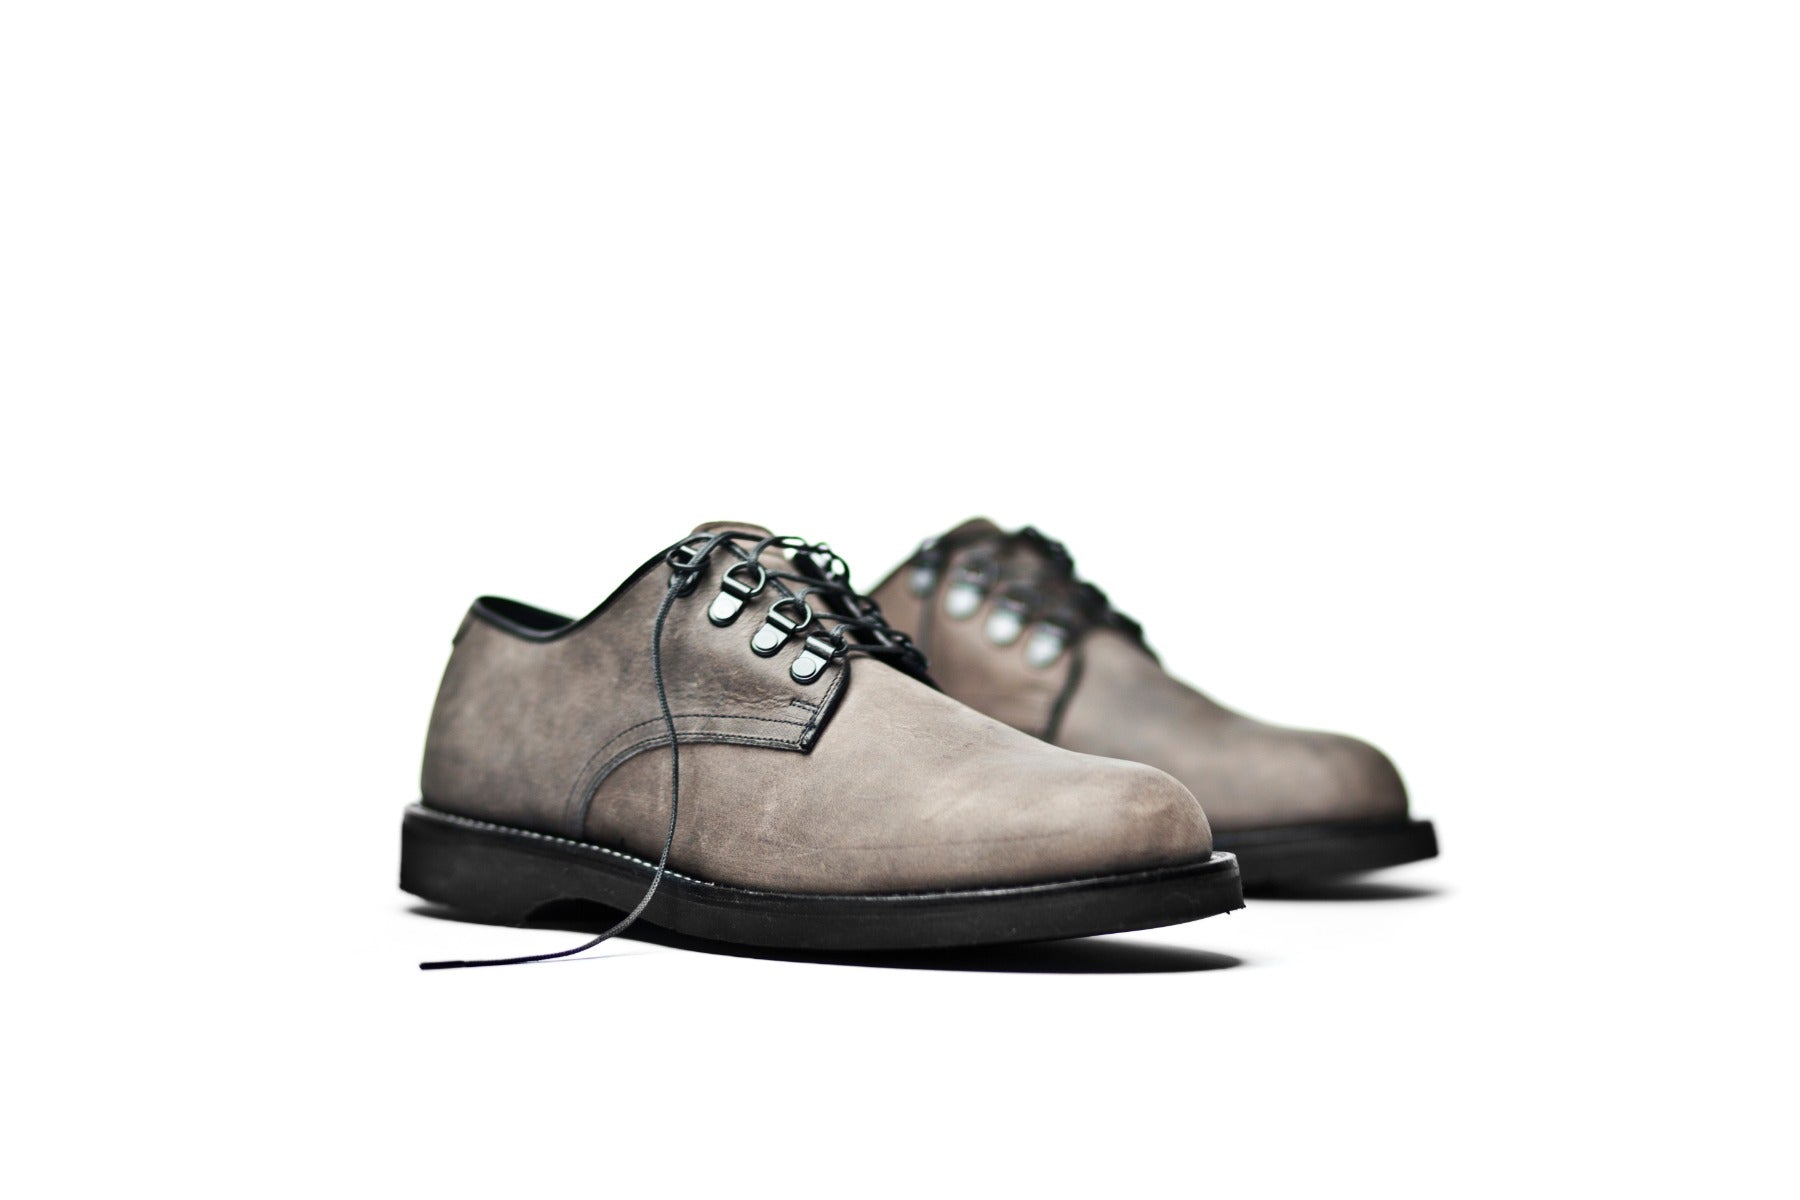 A pair of Broken Homme light gray men's oxford style "Billy" shoes with black soles, set against a white background.